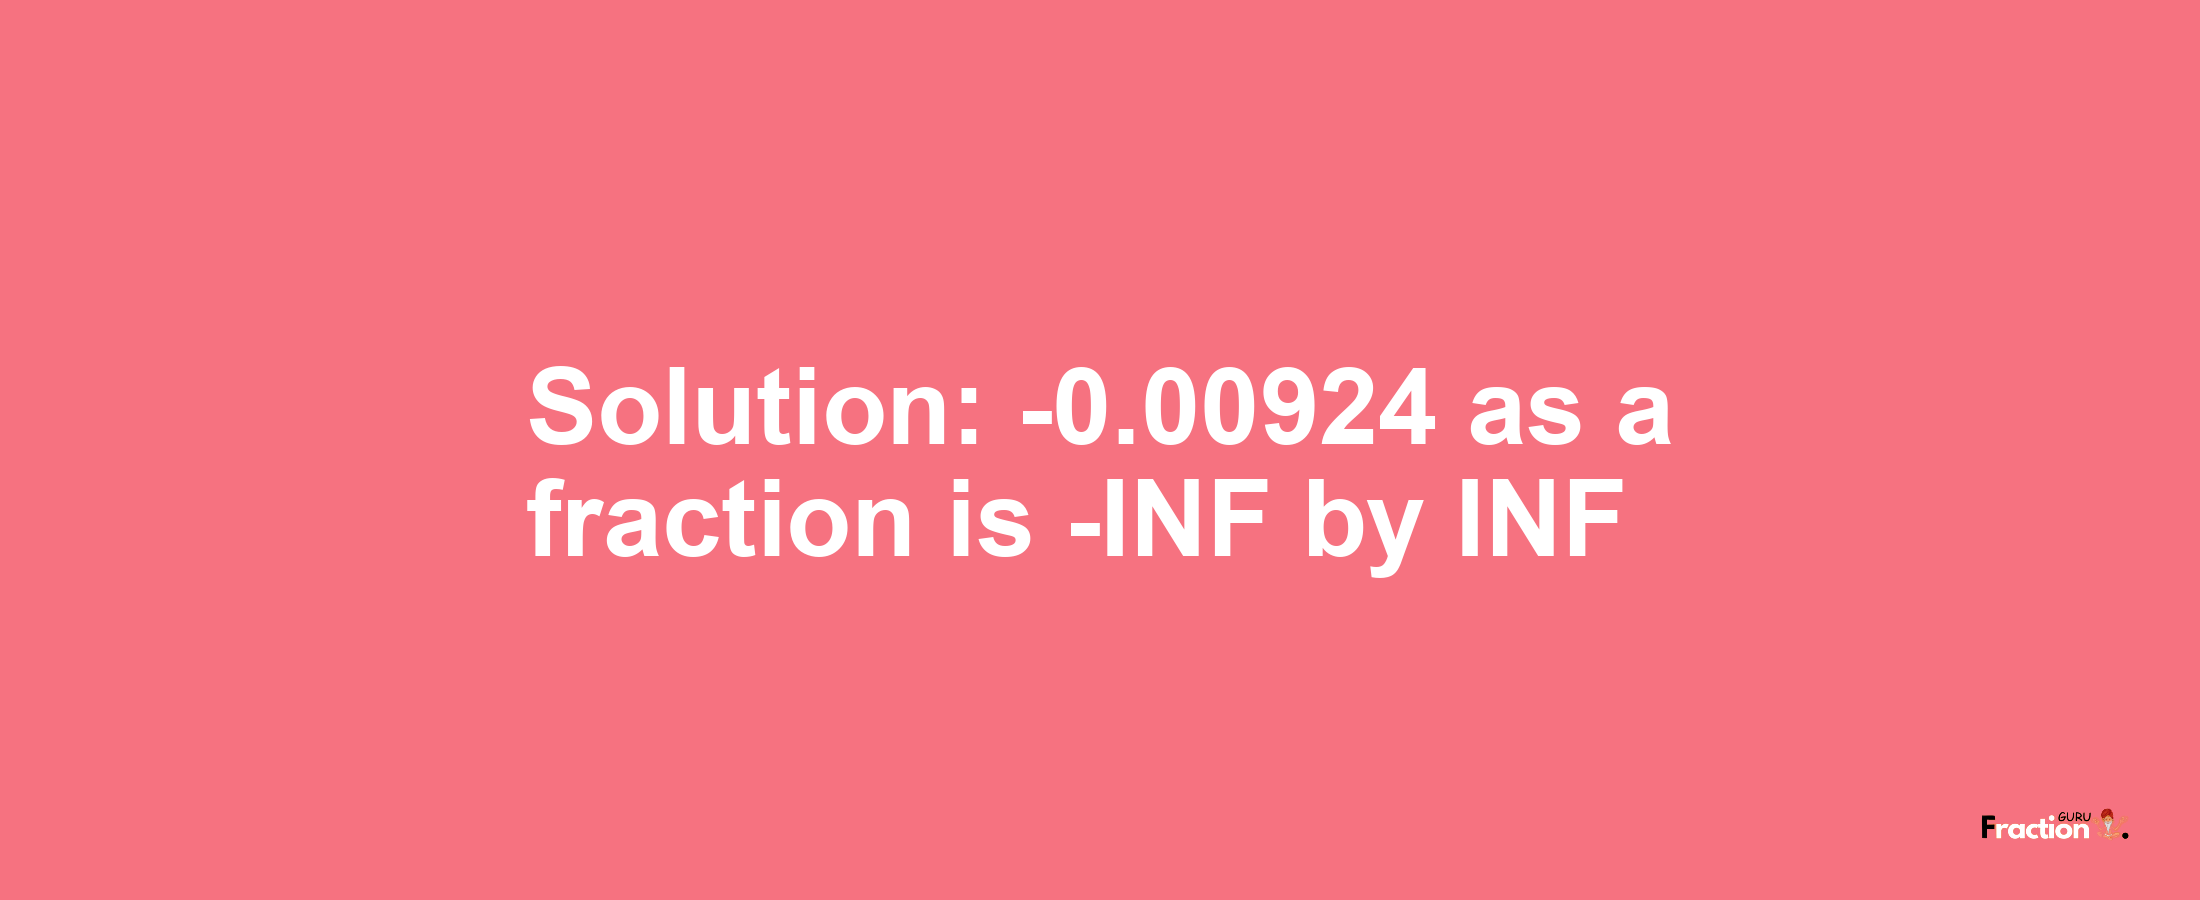 Solution:-0.00924 as a fraction is -INF/INF